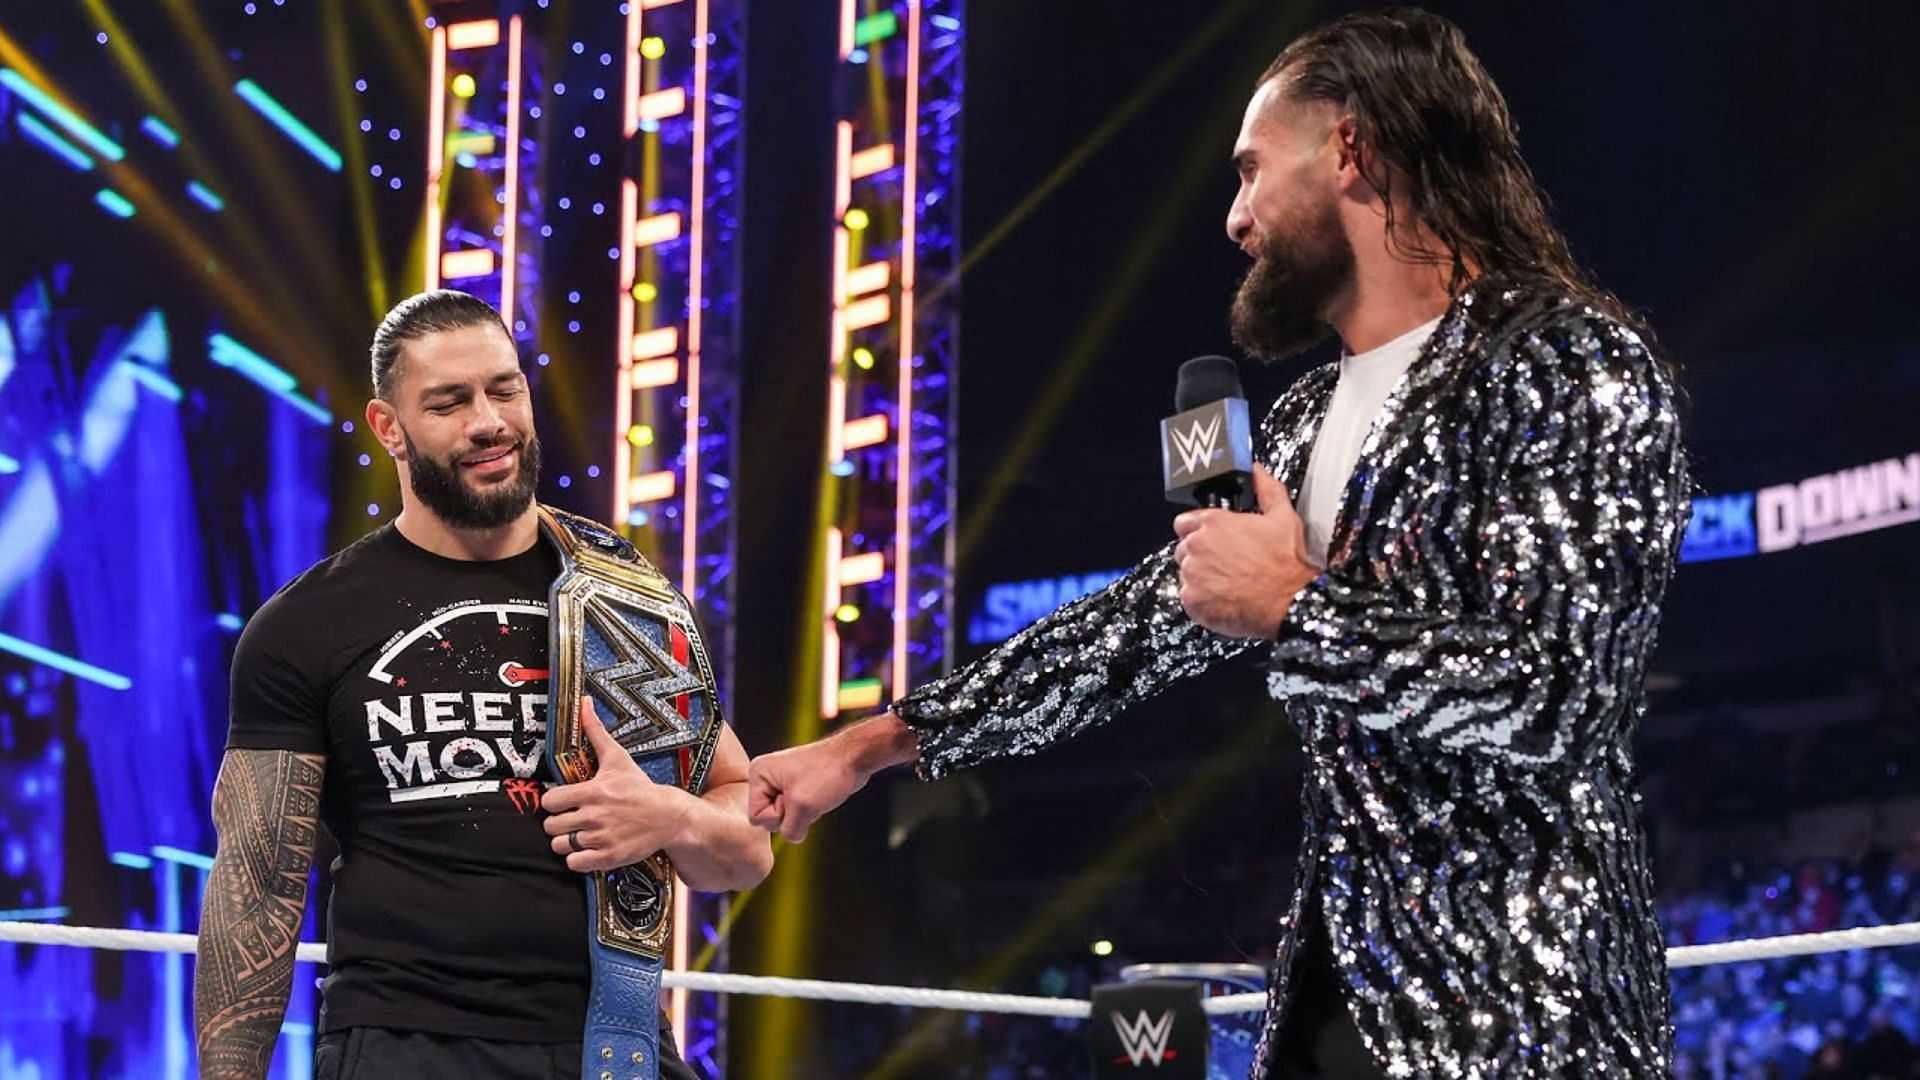 Roman Reigns and Seth Rollins on WWE SmackDown.